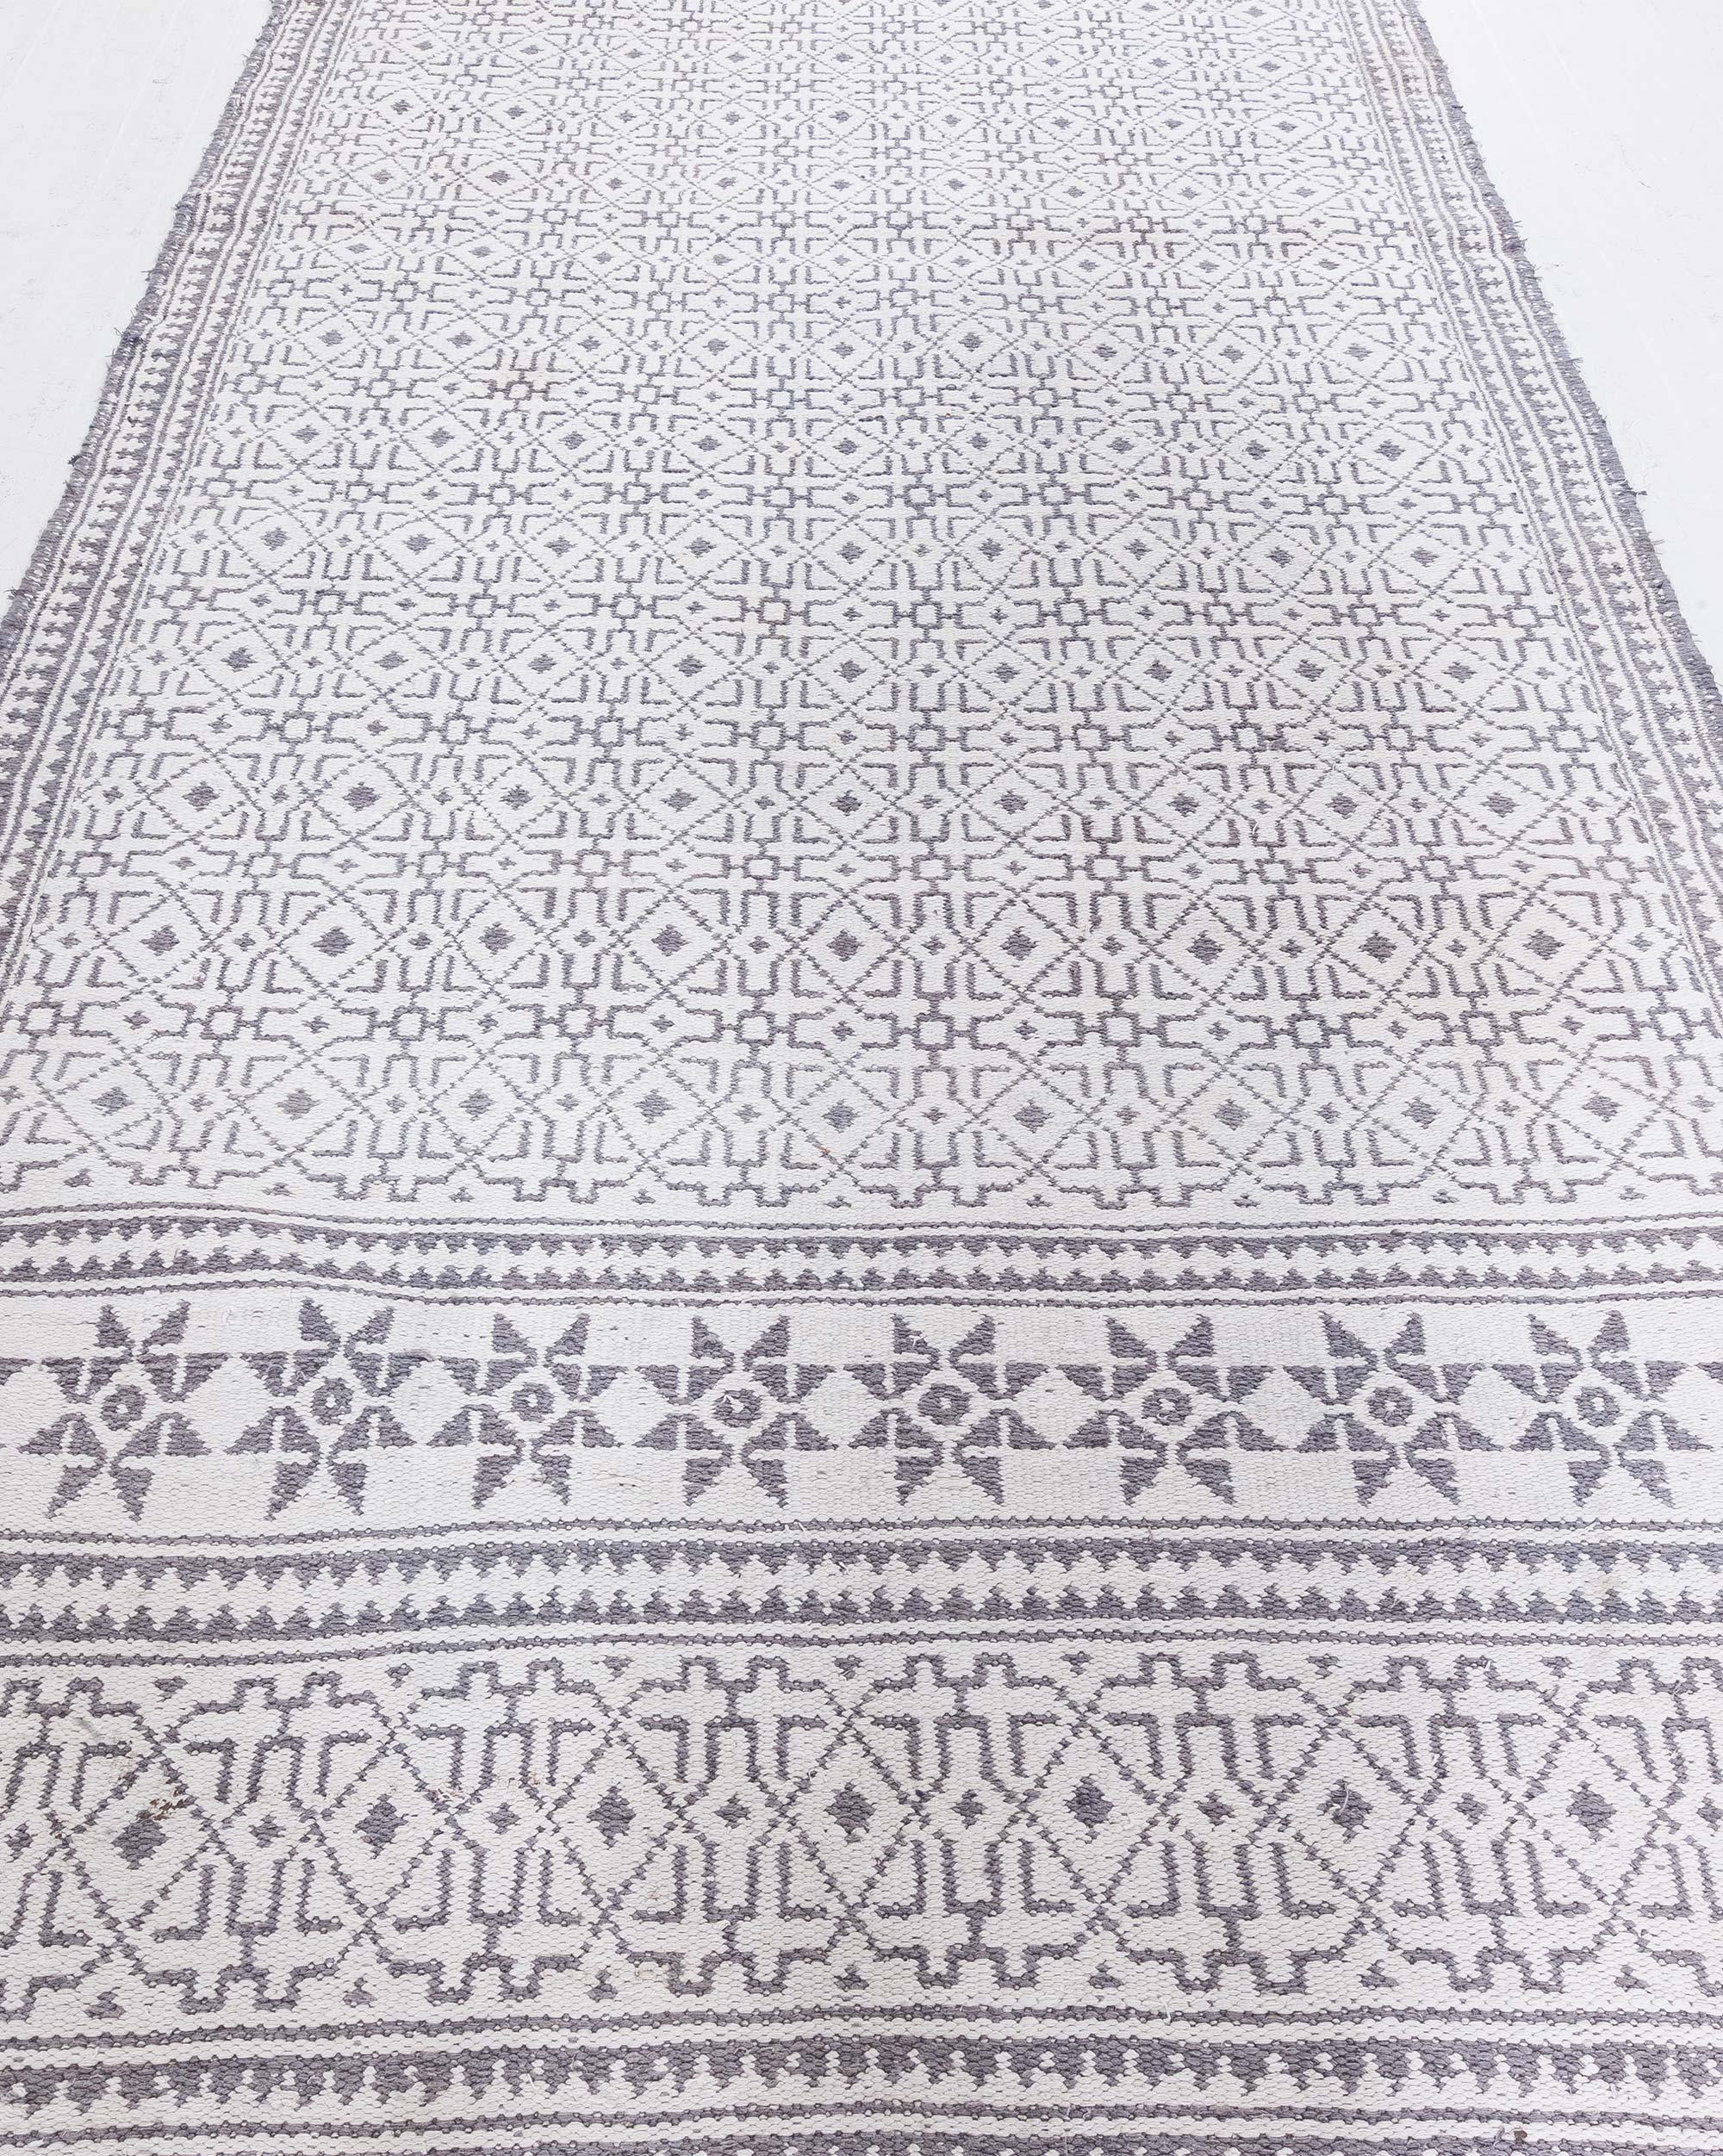 Cotton Agra Runner (Size Adjusted)
Size: 6'3